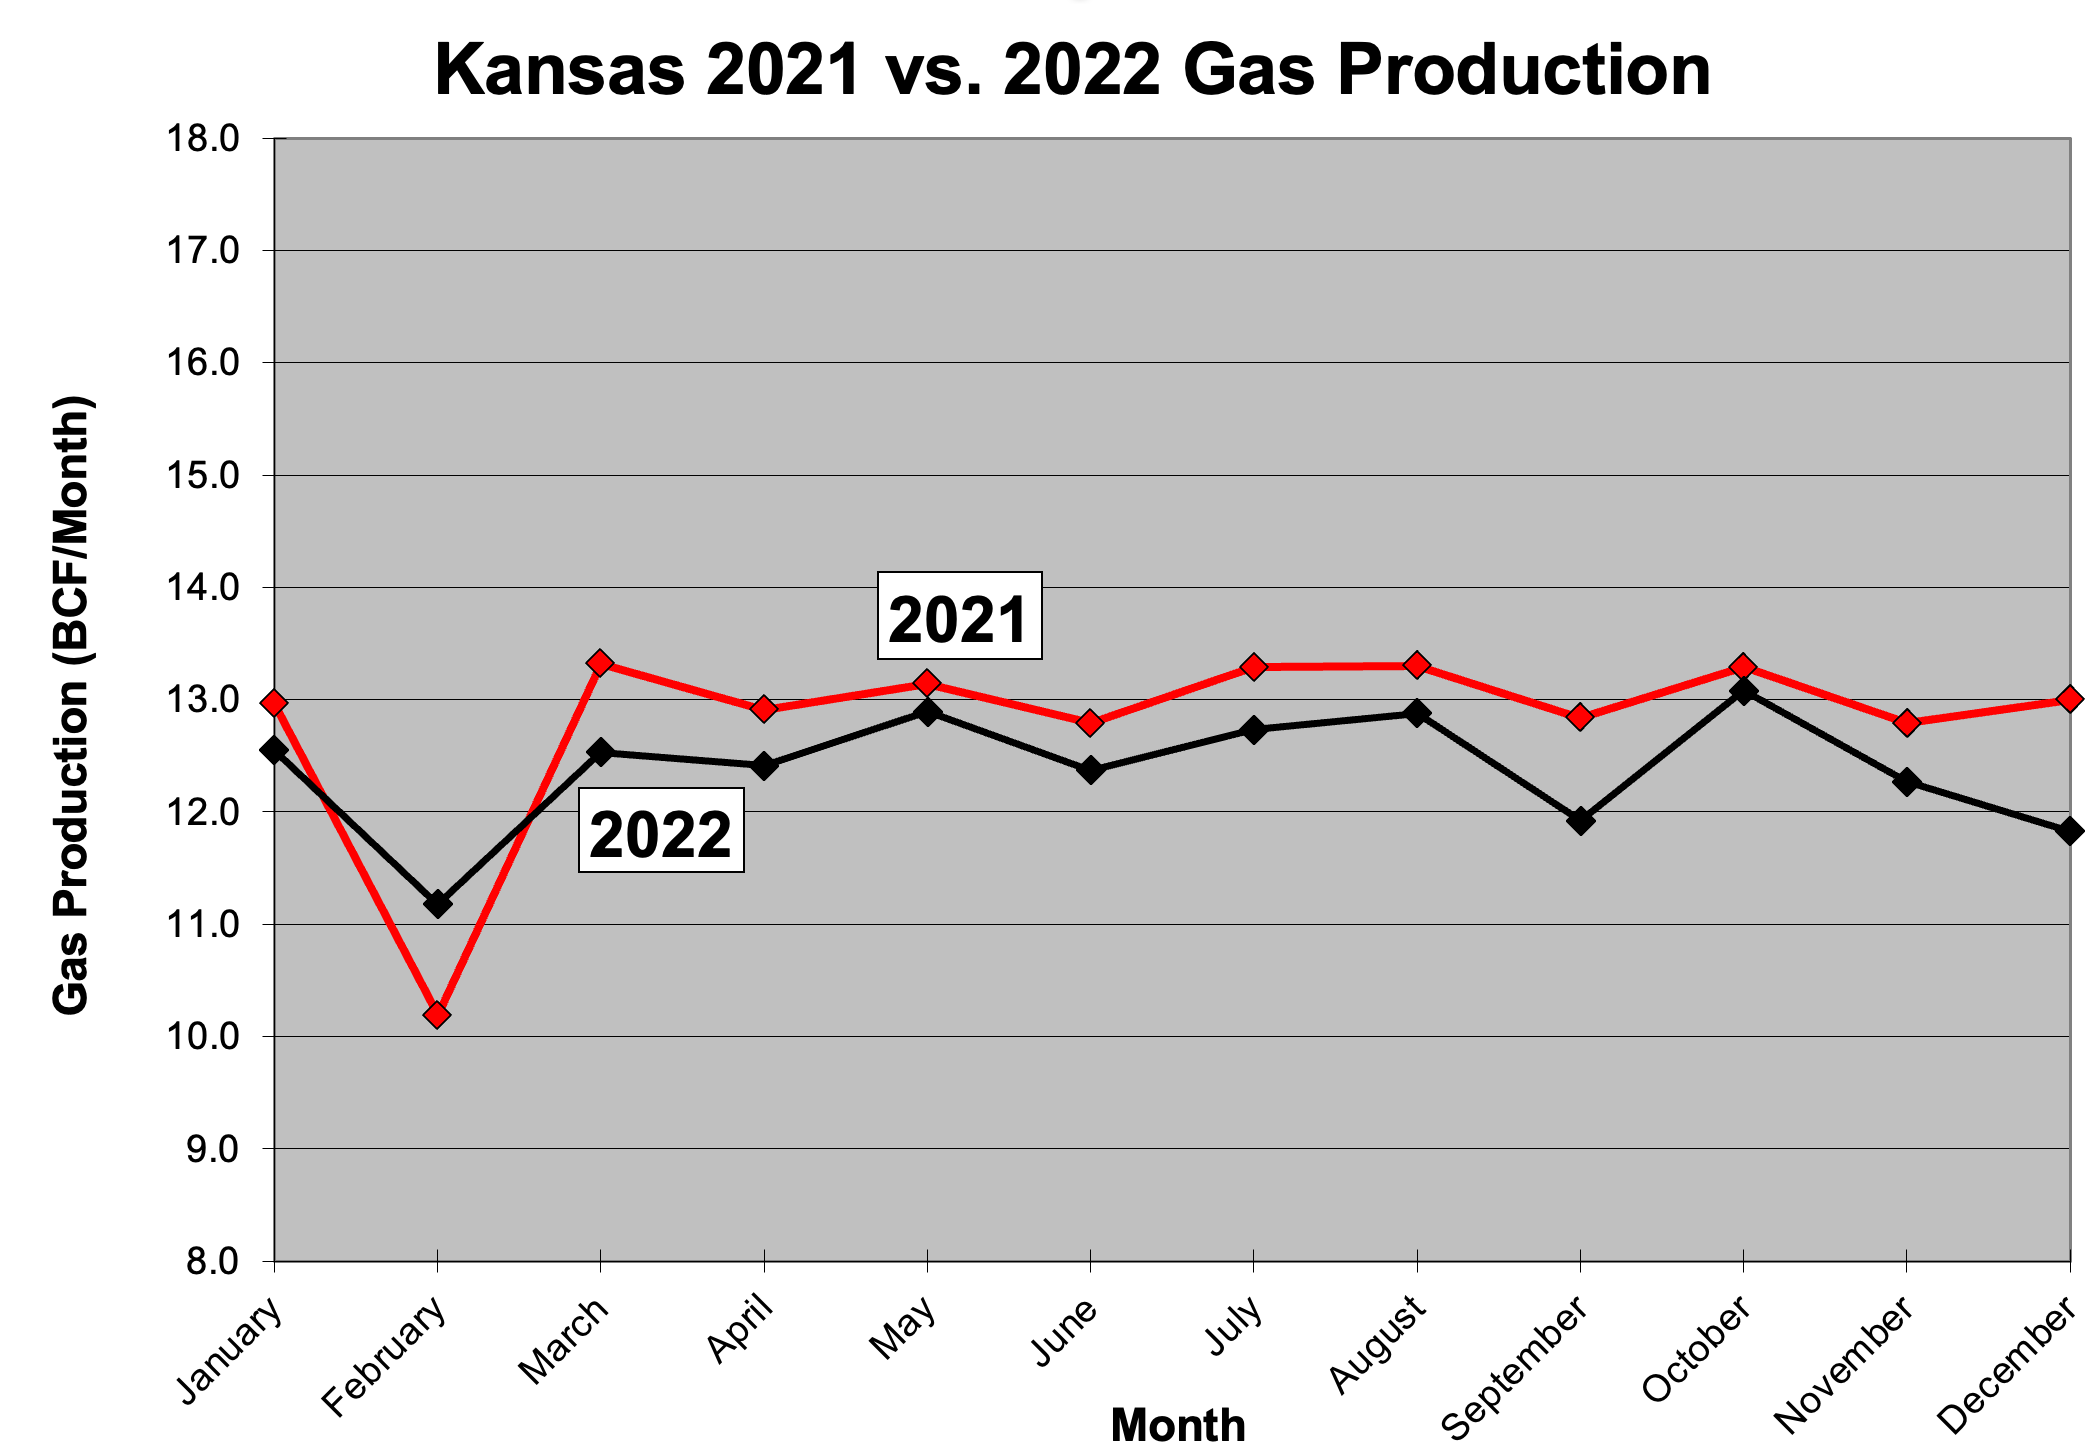 Comparison of gas production in 2021 and 2022 for similar months.